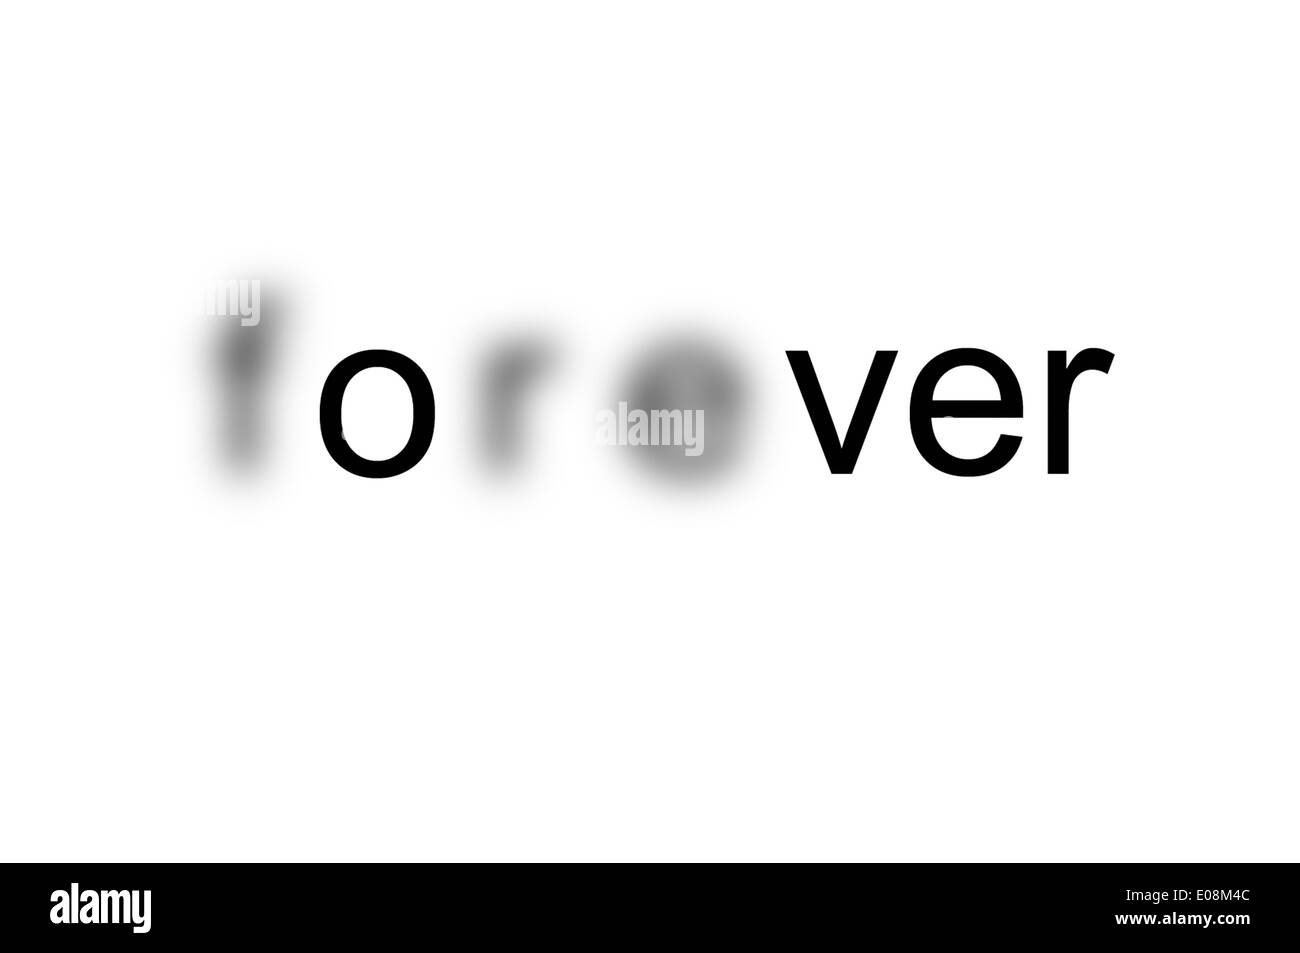 Illustration - Depiction of the word 'forever', in which the letters f, r, and e are blurred to form the word 'over' in Germany. Fotoarchiv für Zeitgeschichte - NO WIRE SERVICE Stock Photo